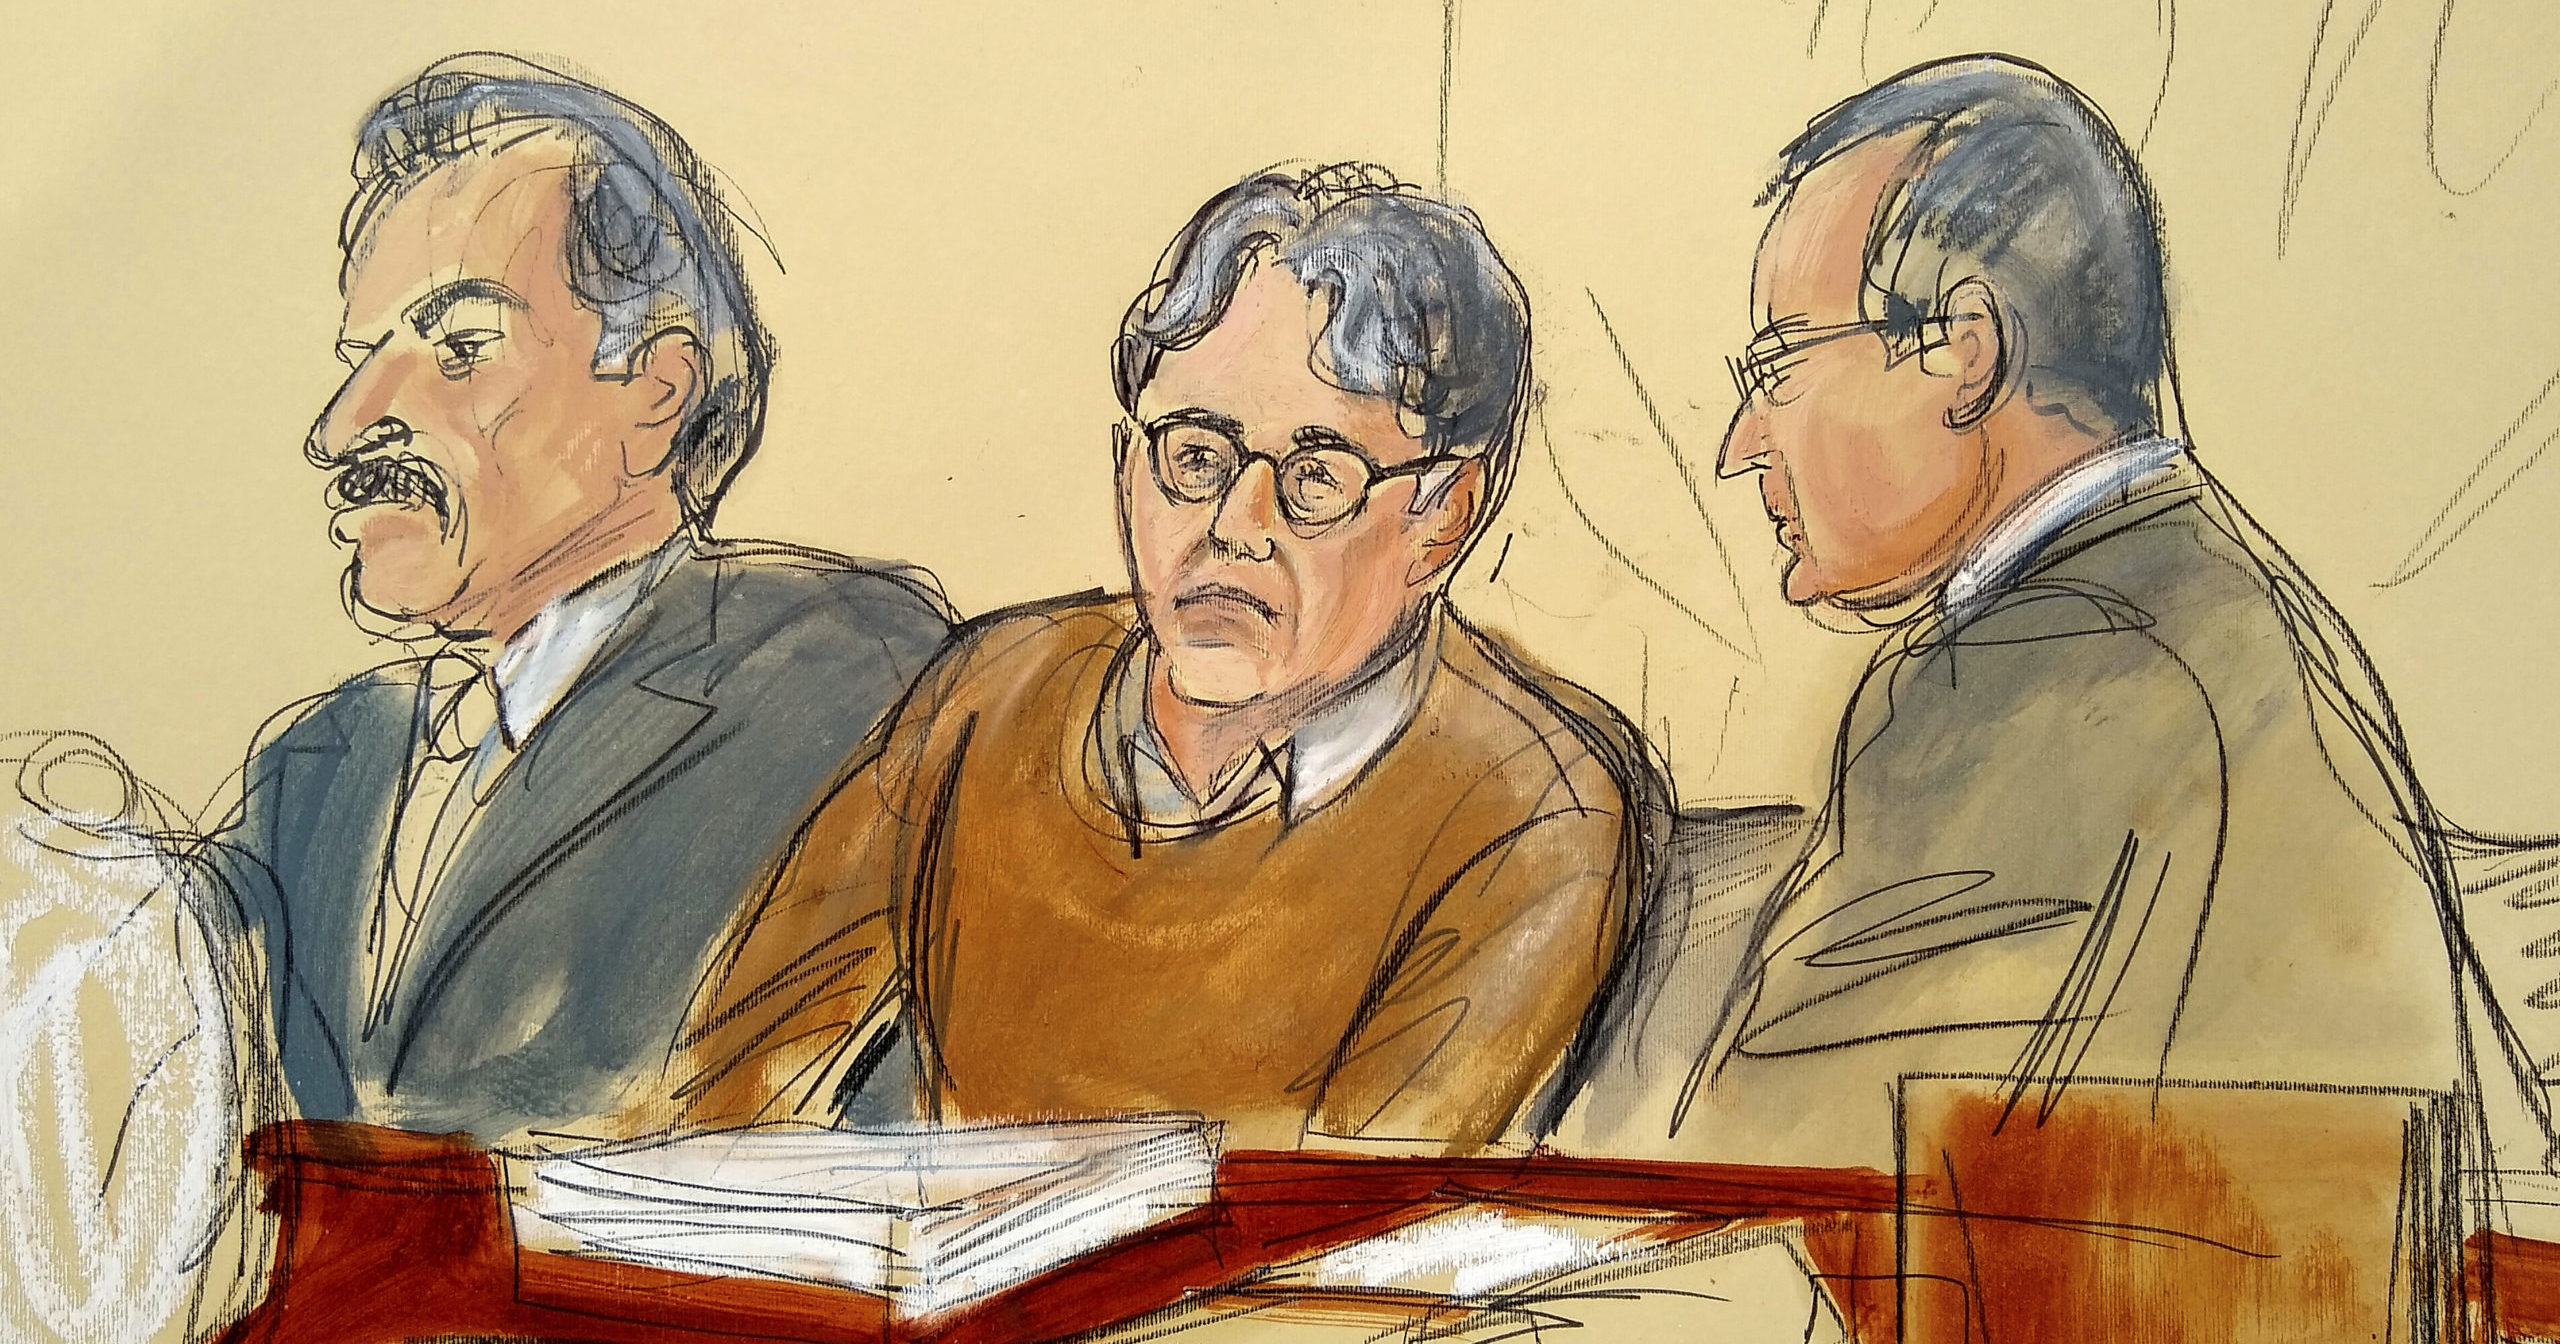 In this May 7, 2019, file courtroom drawing, defendant Keith Raniere, leader of the secretive group NXIVM, is seated between his attorneys during the first day of his sex trafficking trial.